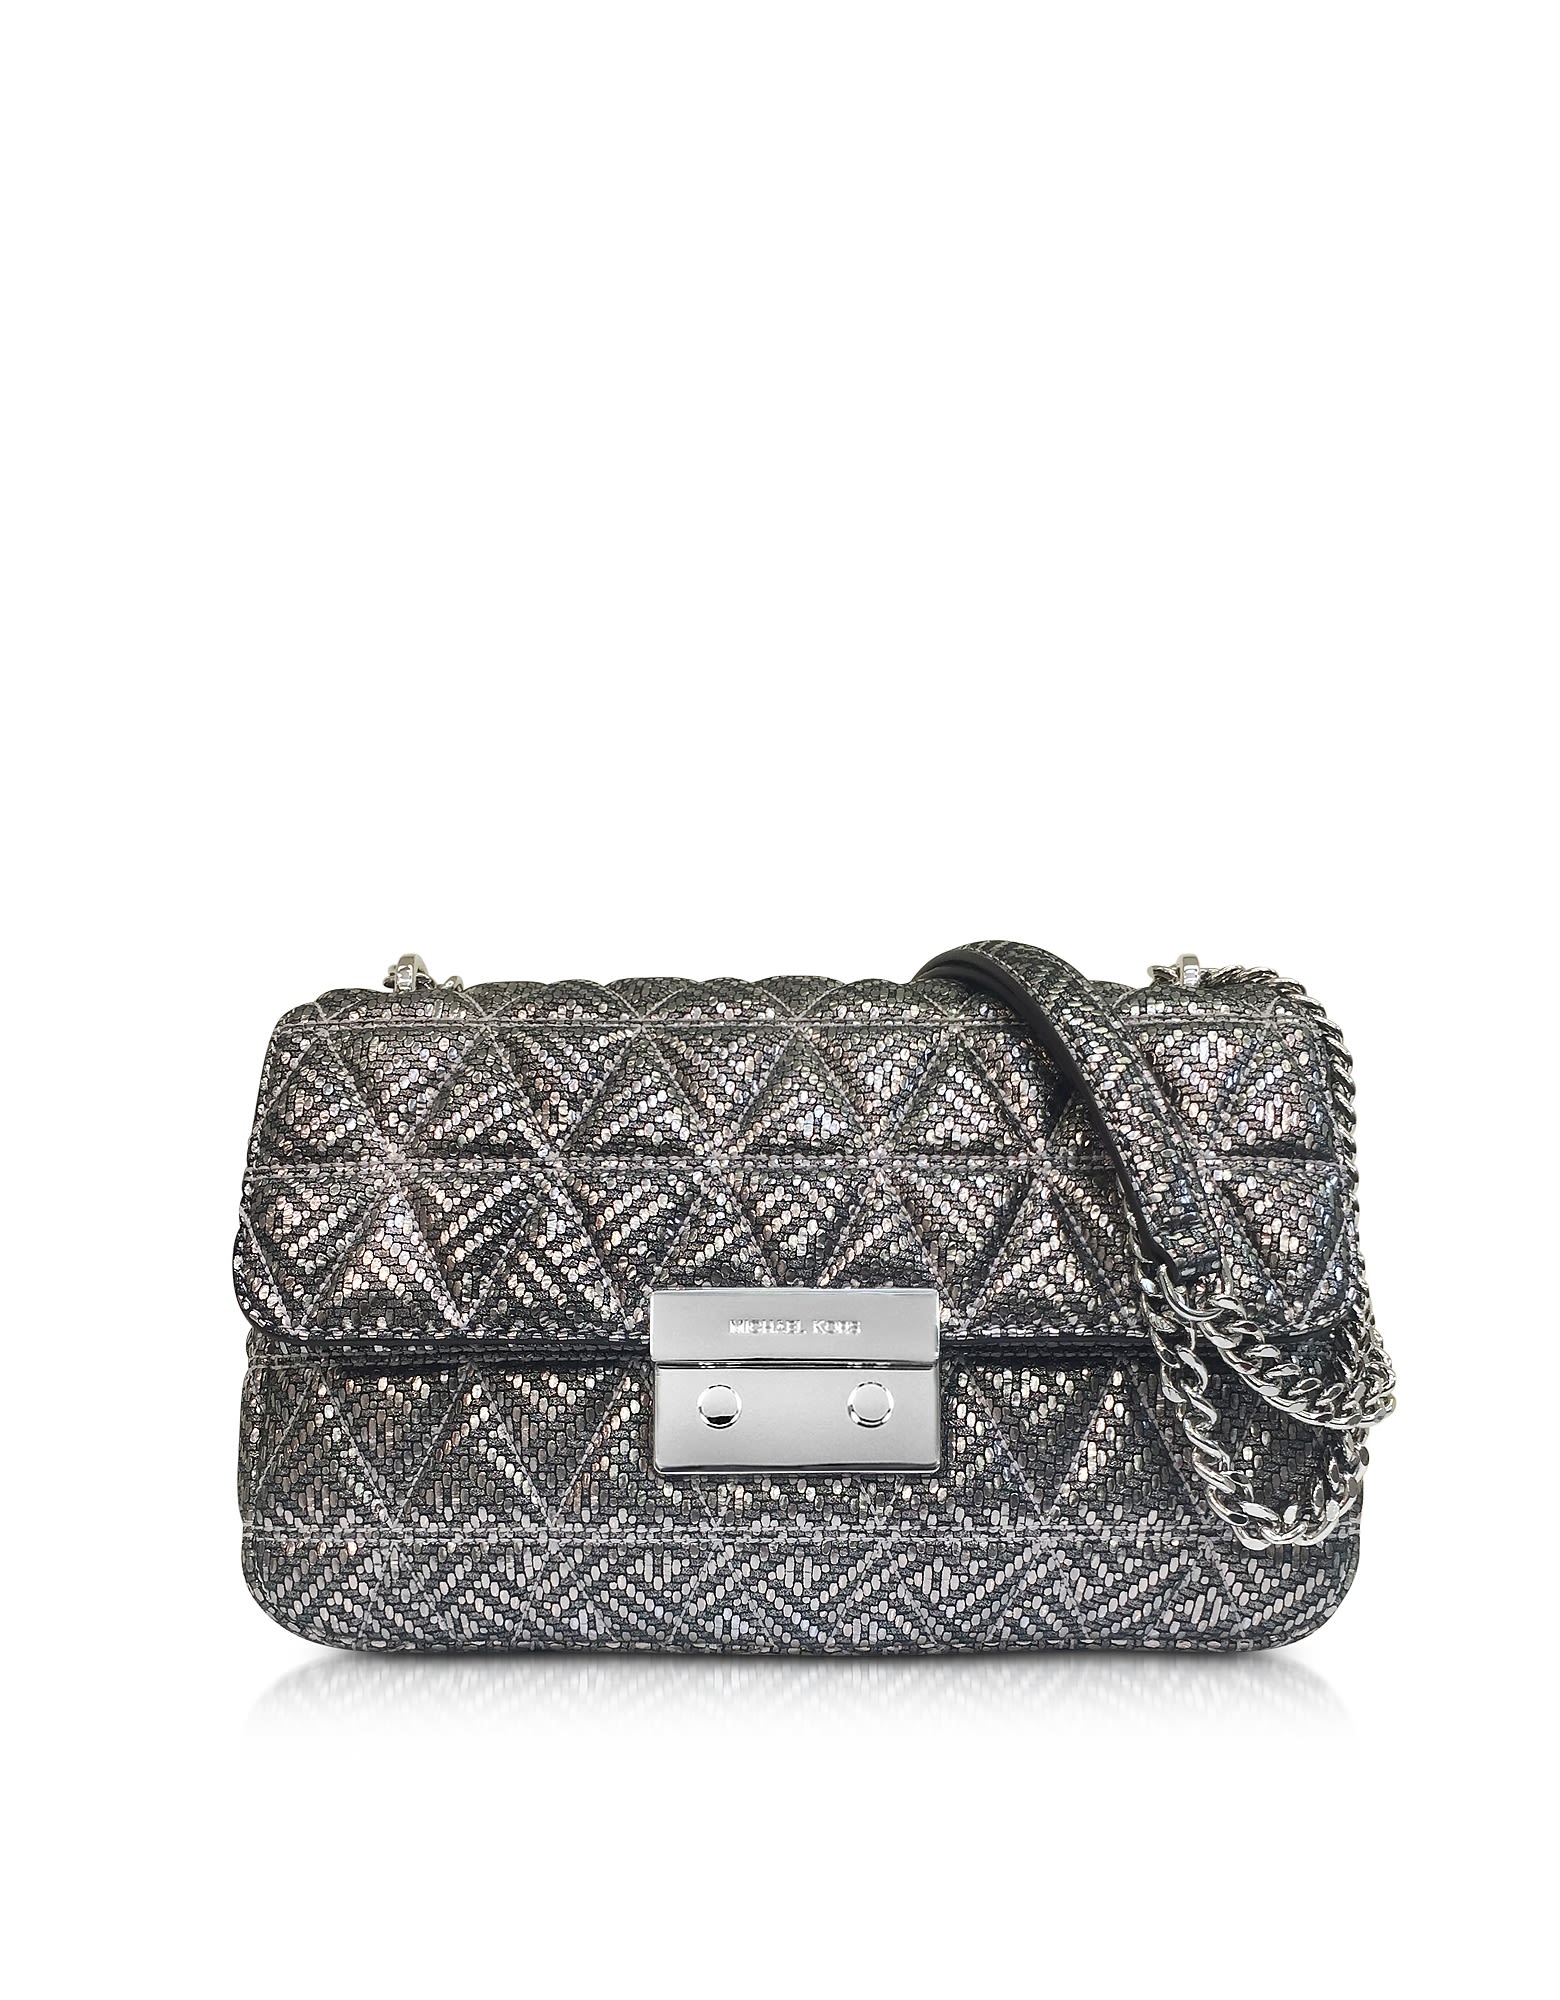 MICHAEL KORS SILVER QUILTED LEATHER SLOAN LARGE CHAIN SHOULDER BAG,10590096